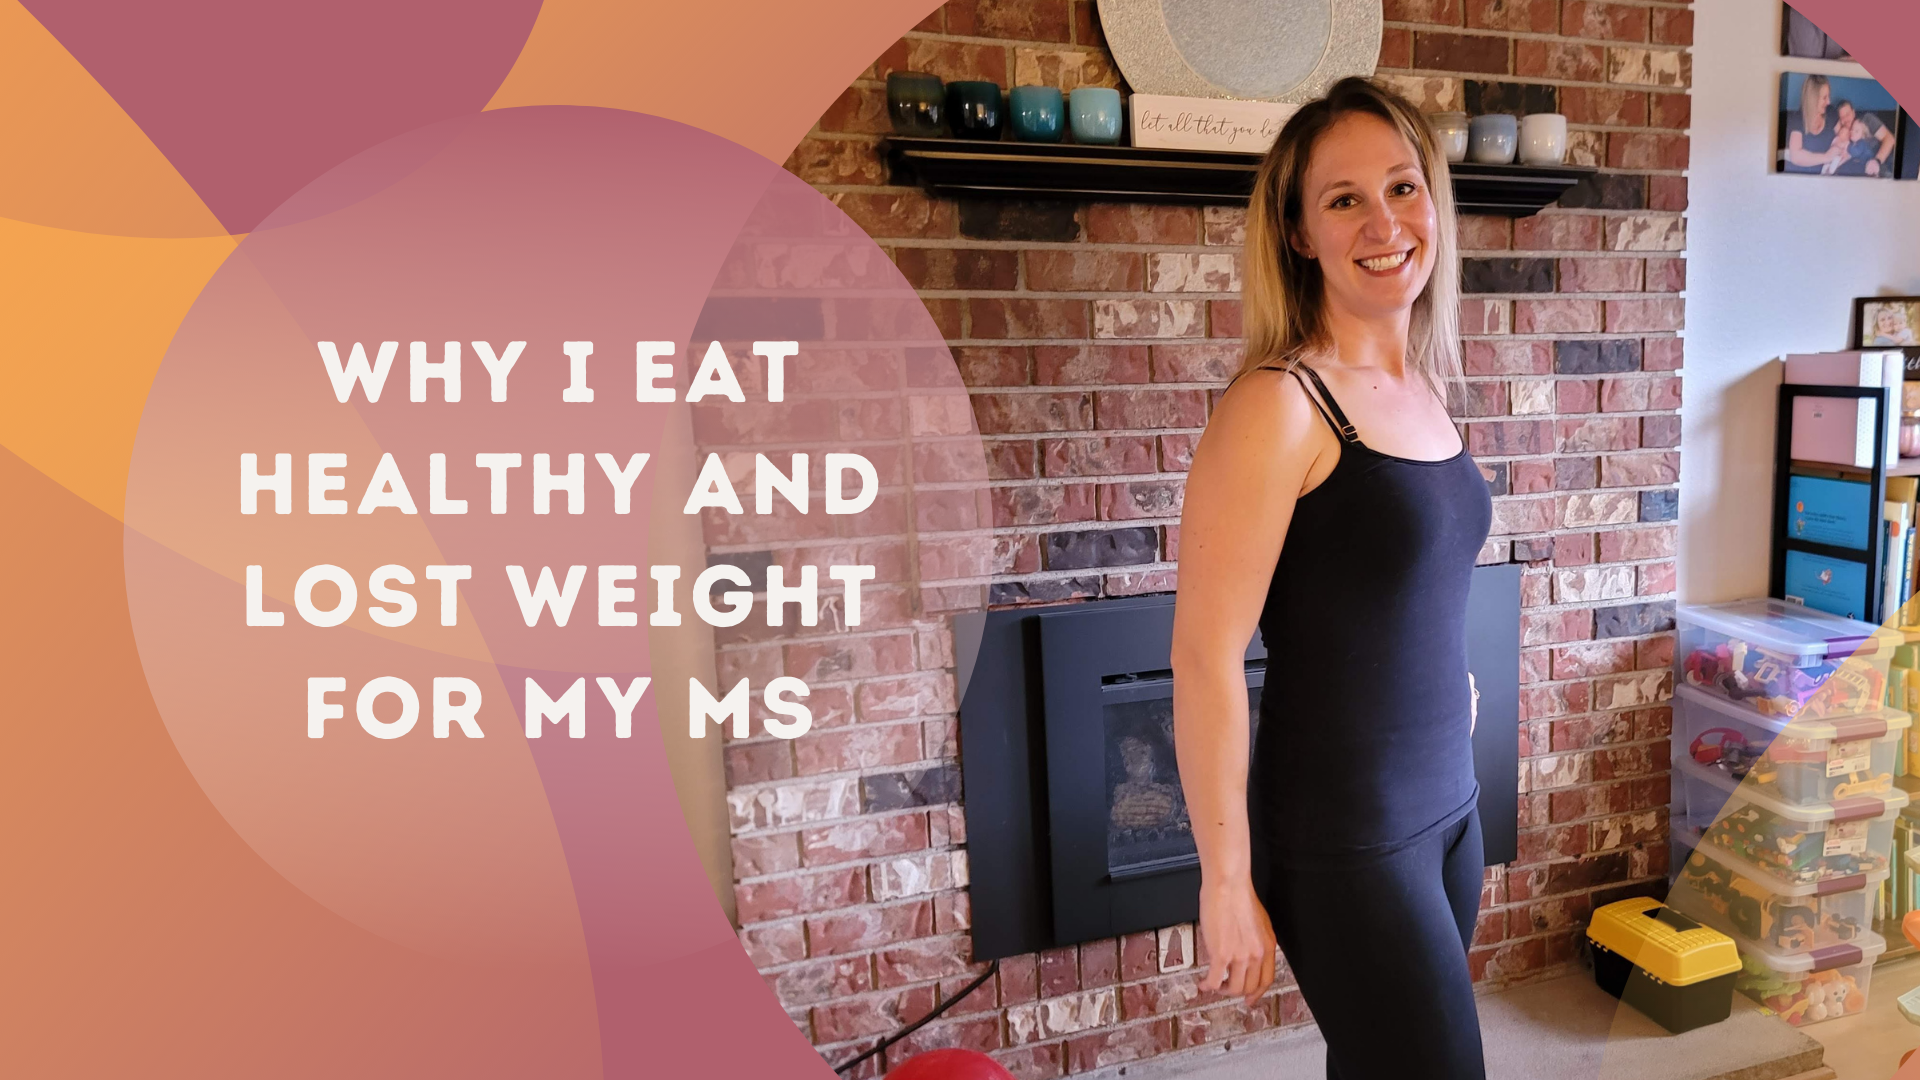 Why I Eat Healthy and Lost Weight for My MS